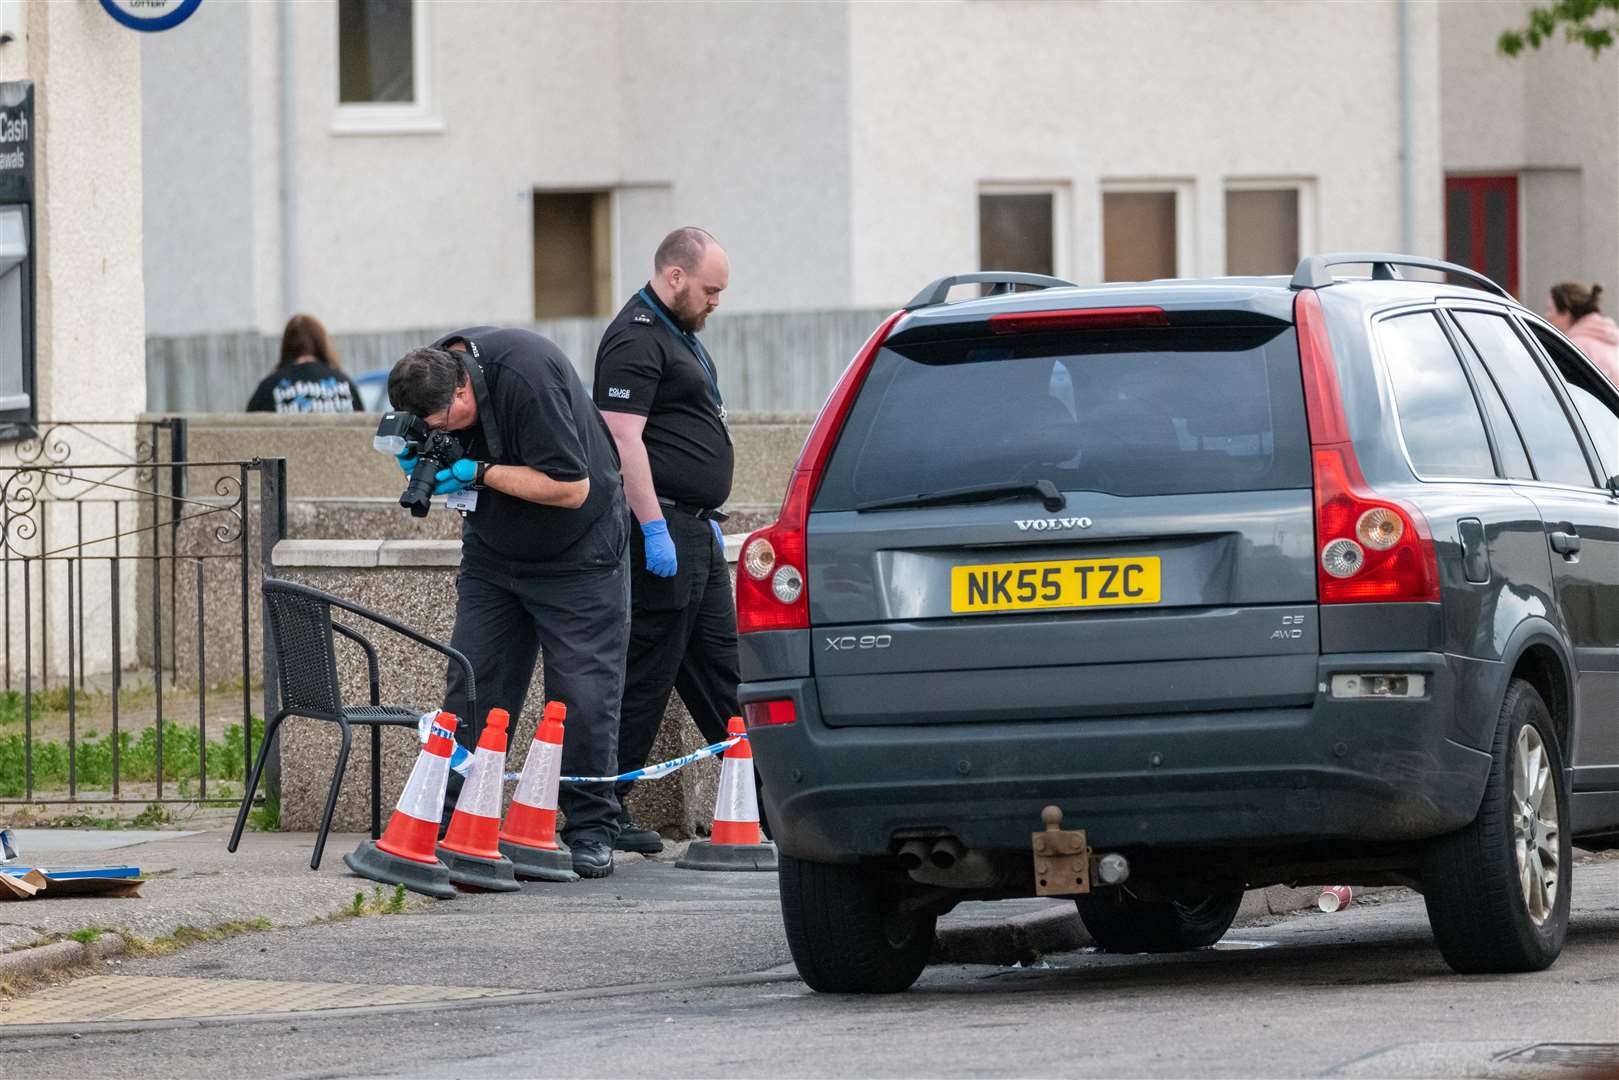 This is the scene of an alleged stabbing of a woman outside Scotmid Store. The Police also had an interest in the Volvo Car and a bike. Picture: Jasperimage